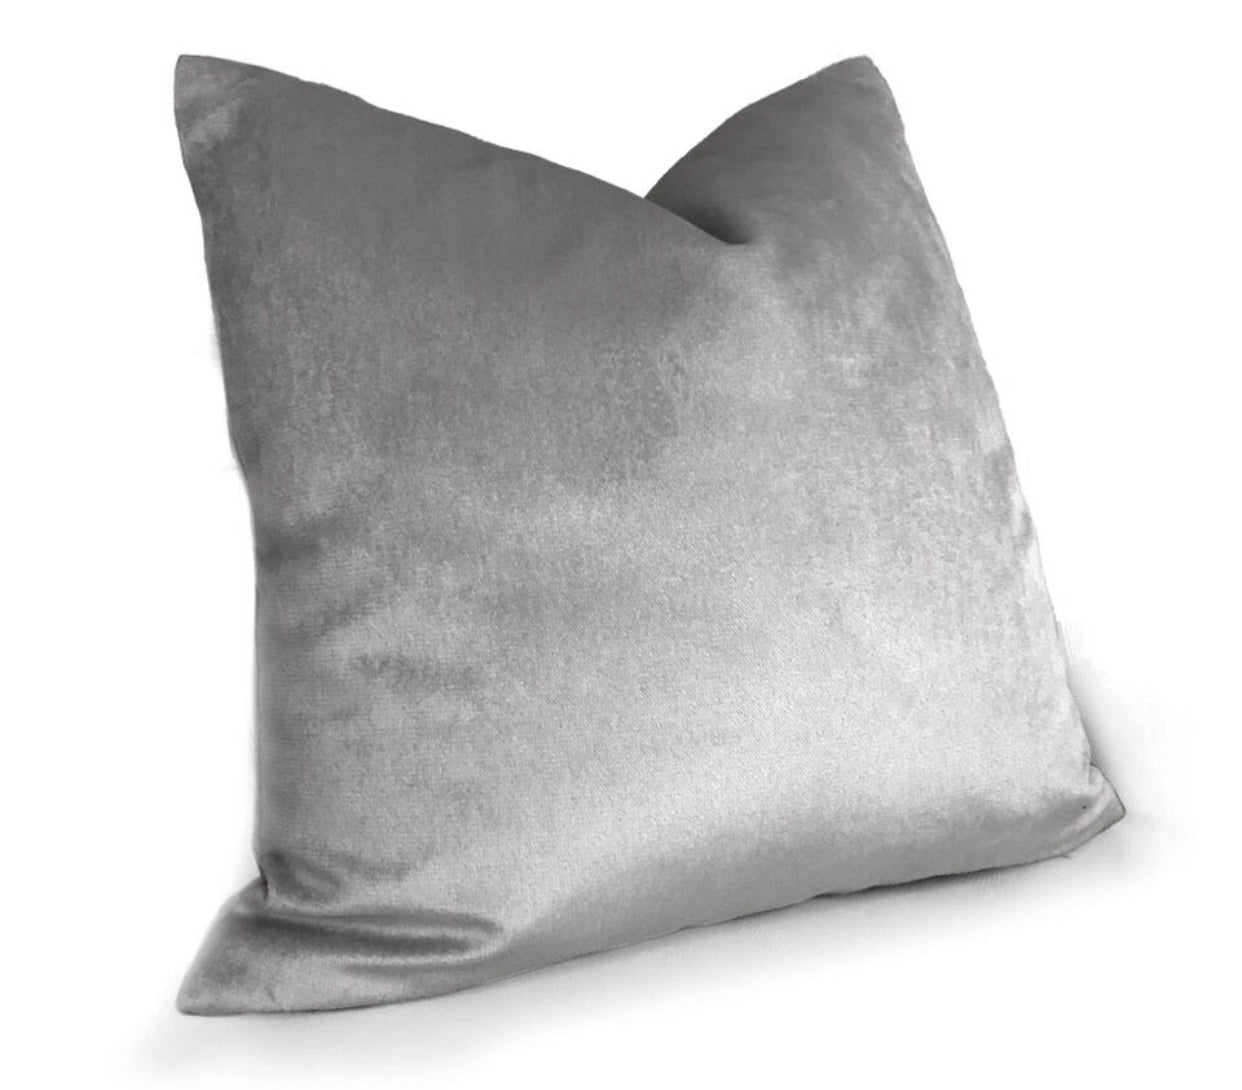 Grey Suede Cushion Cover